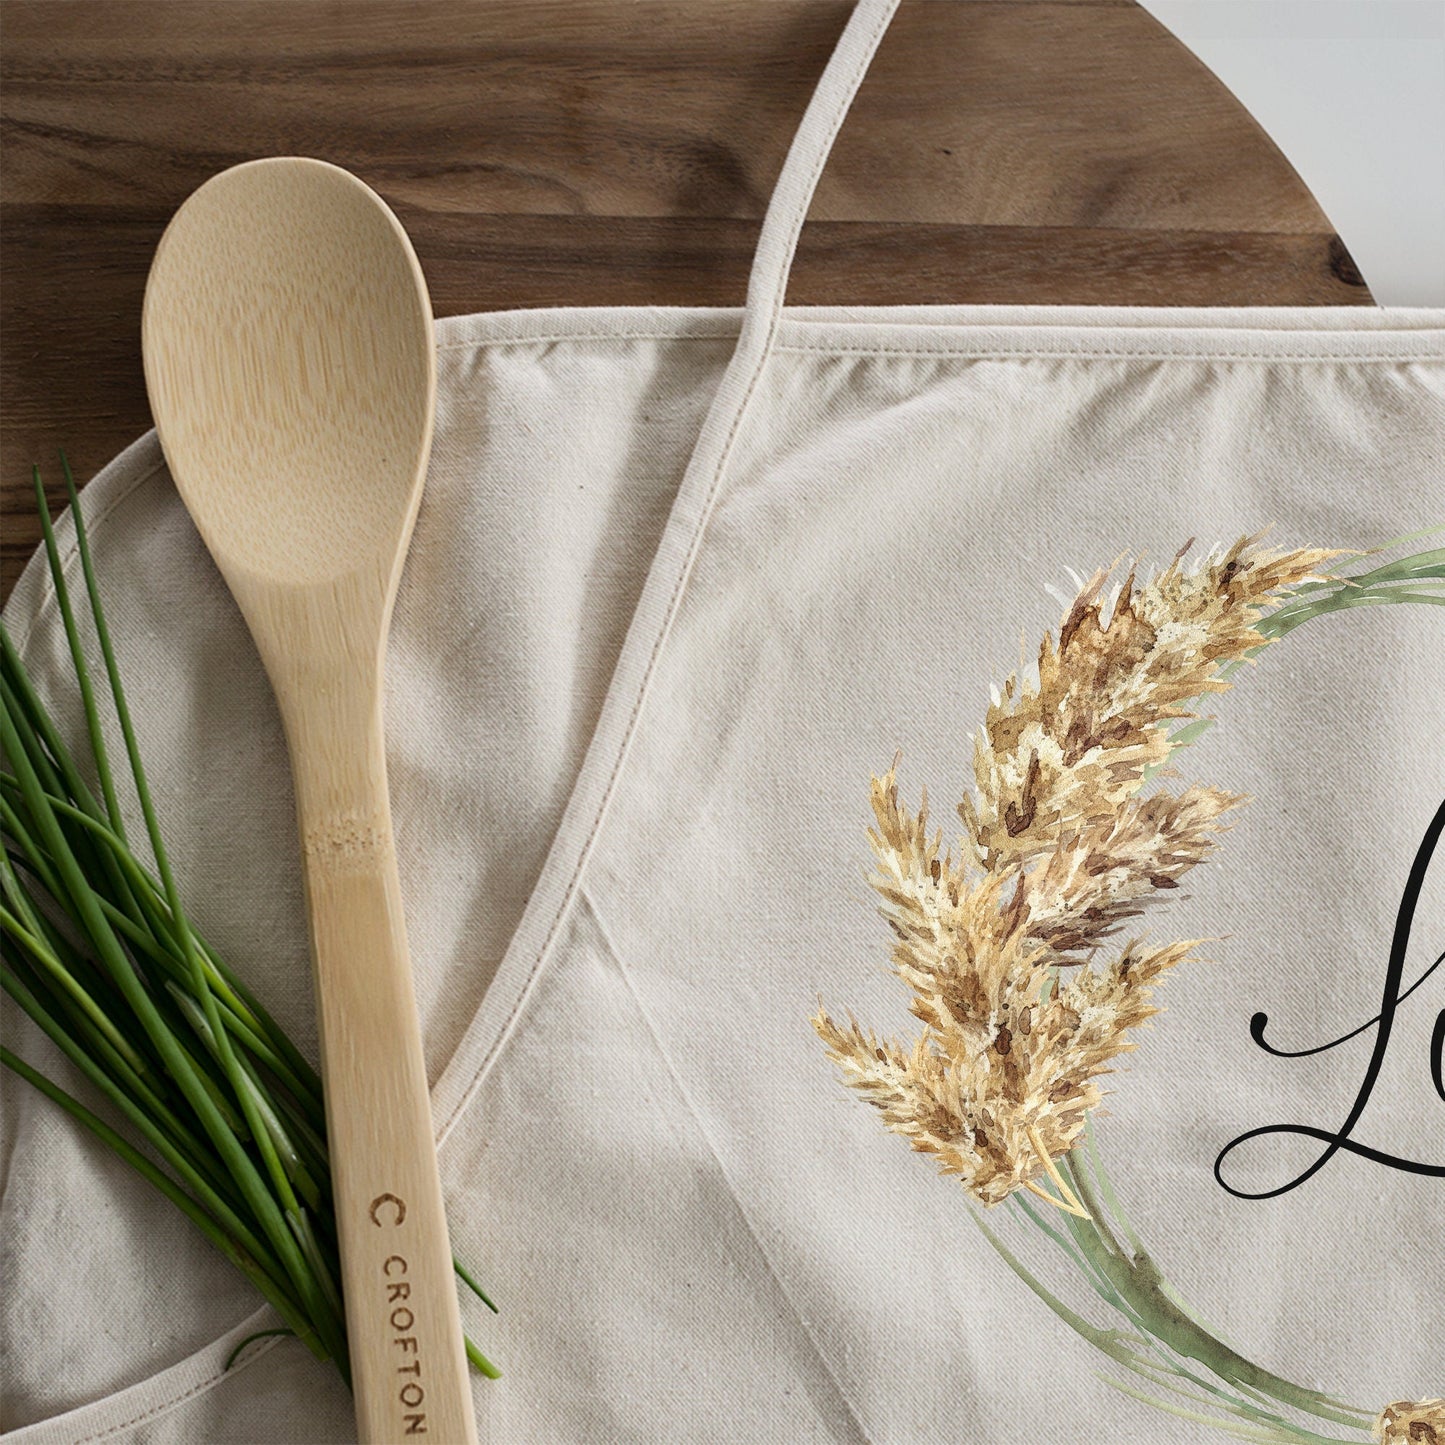 Load image into Gallery viewer, Boho Kitchen Housewarming Gift | Birthday Gift | Pampas Grass Kitchen Apron | Personalized Apron | Bridesmaid Gifts | Bridal Party Gift
